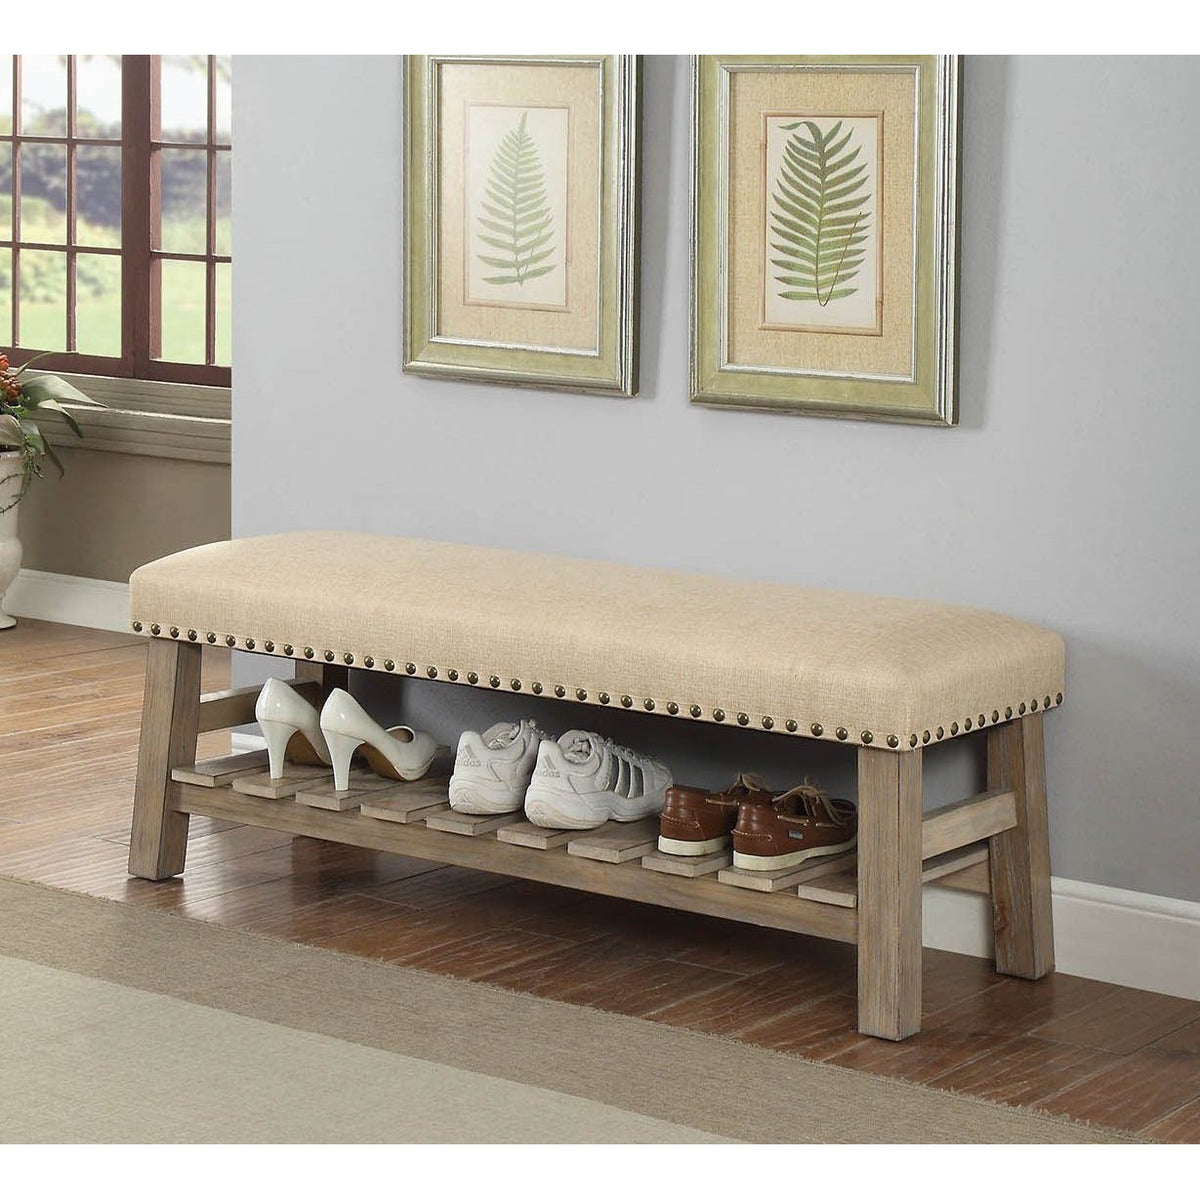 Nail Head Upholstered Accent Bench,bench,Adley & Company Inc.